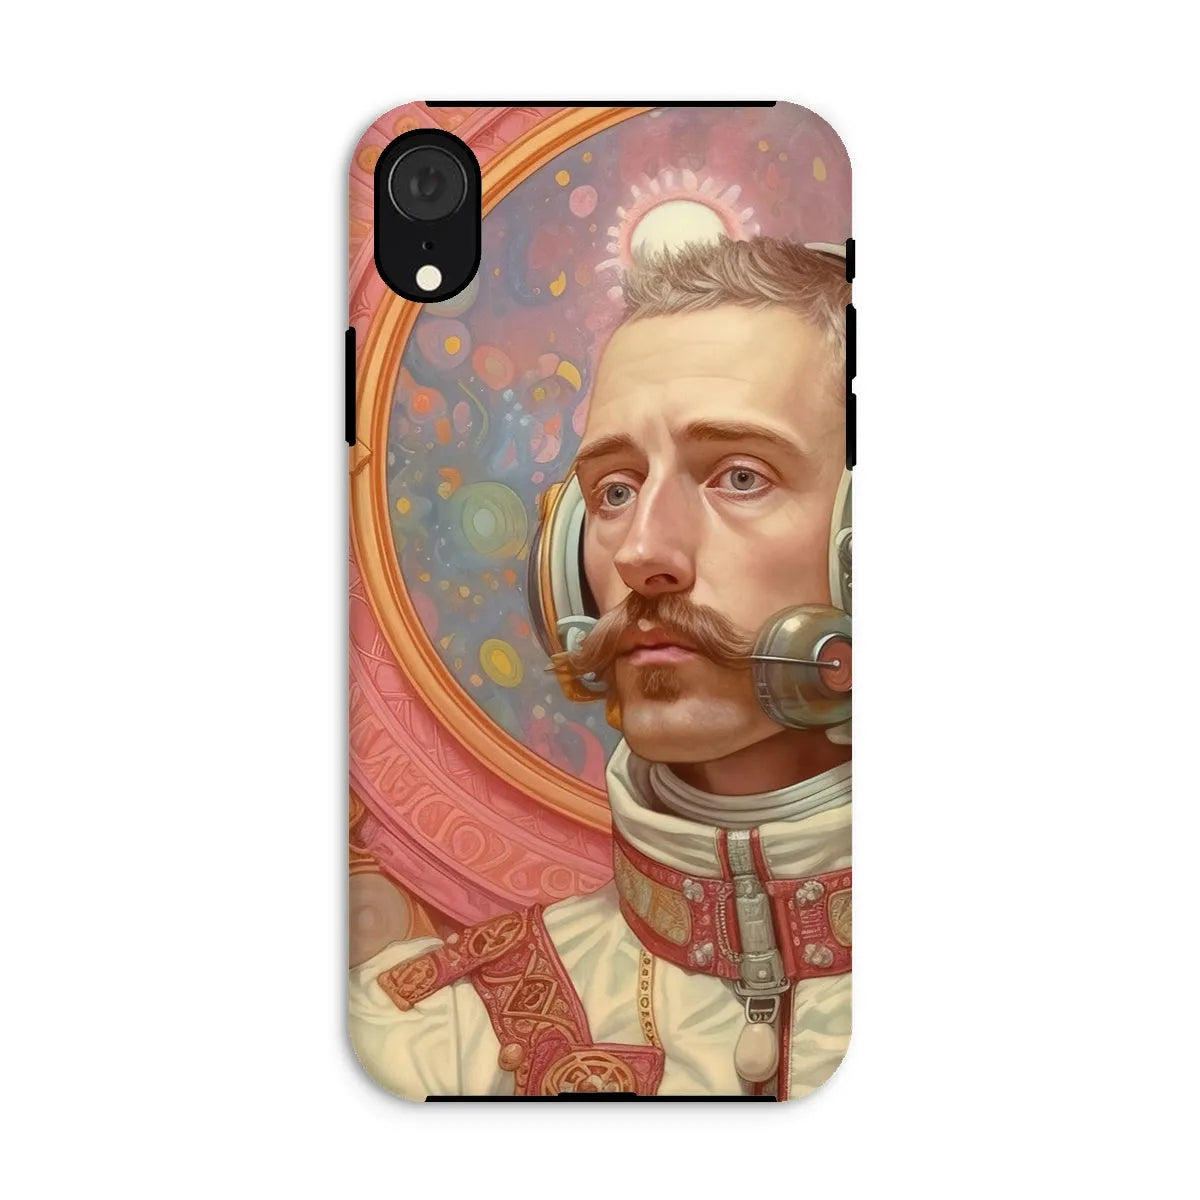 Axel The Gay Astronaut - Gay Aesthetic Art Phone Case - Iphone Xr / Matte - Mobile Phone Cases - Aesthetic Art